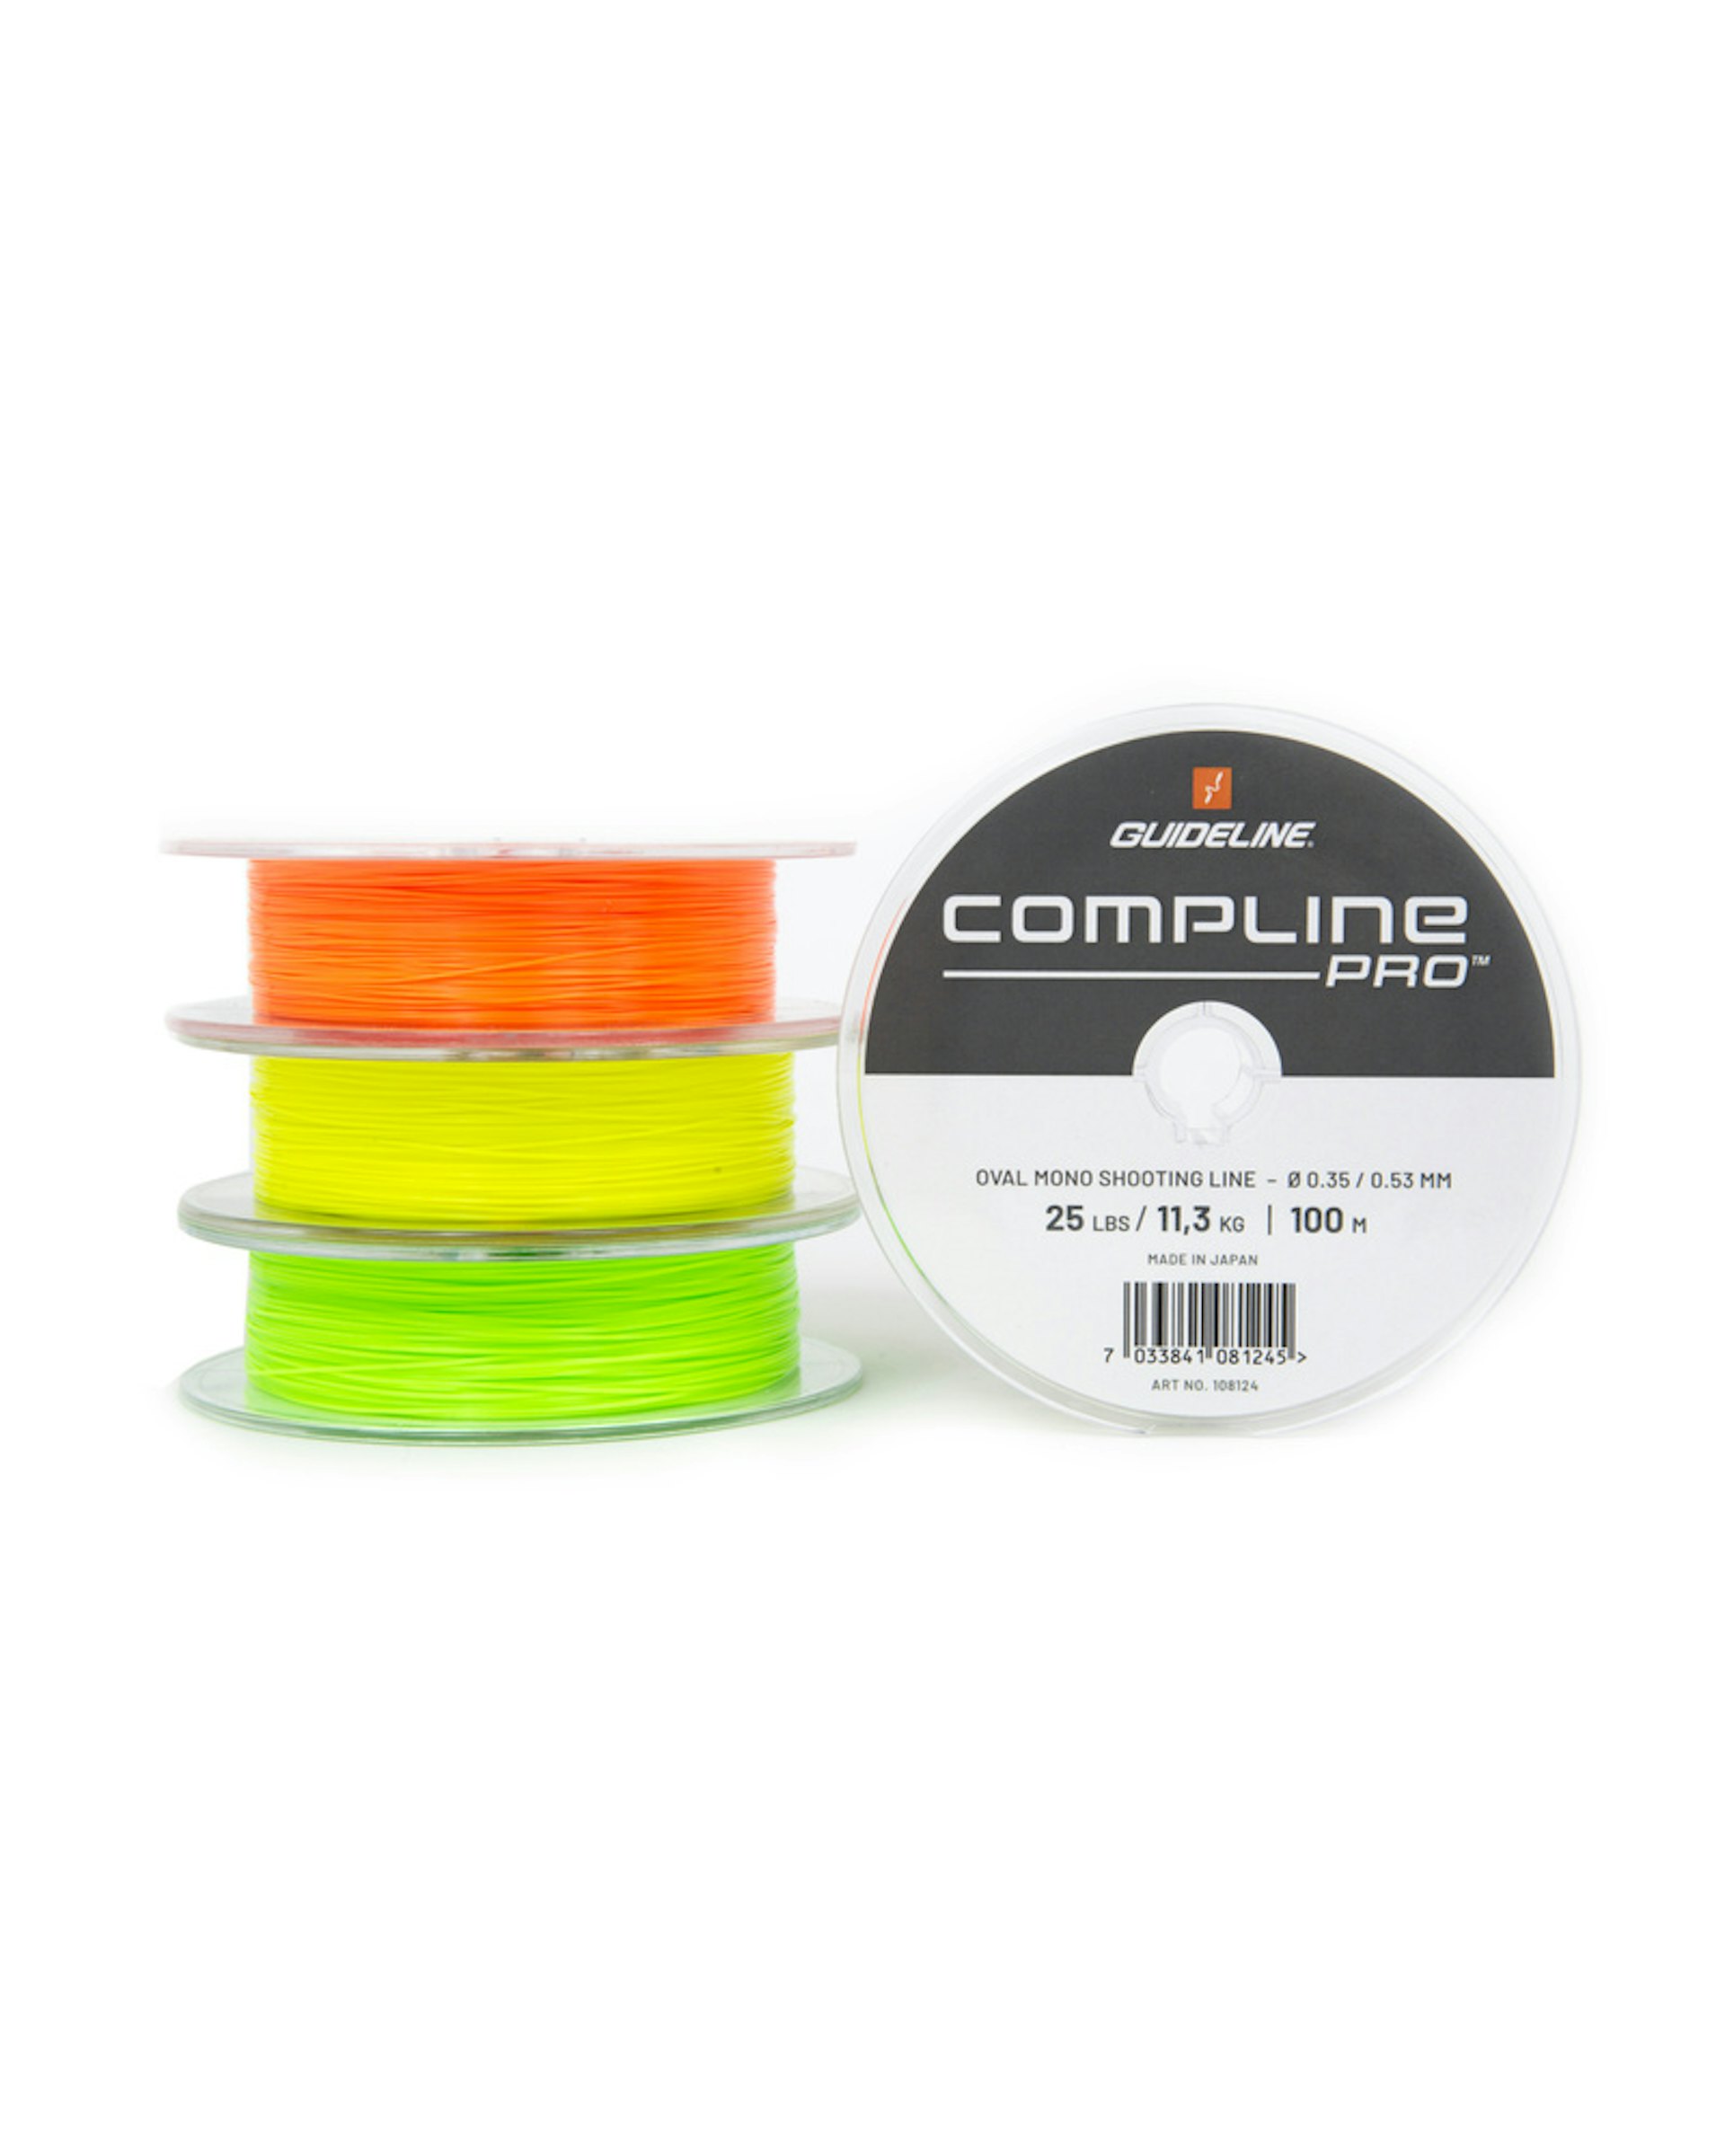 Fly Lines - Multi Tip fly lines - Trout fishing, salmon fishing